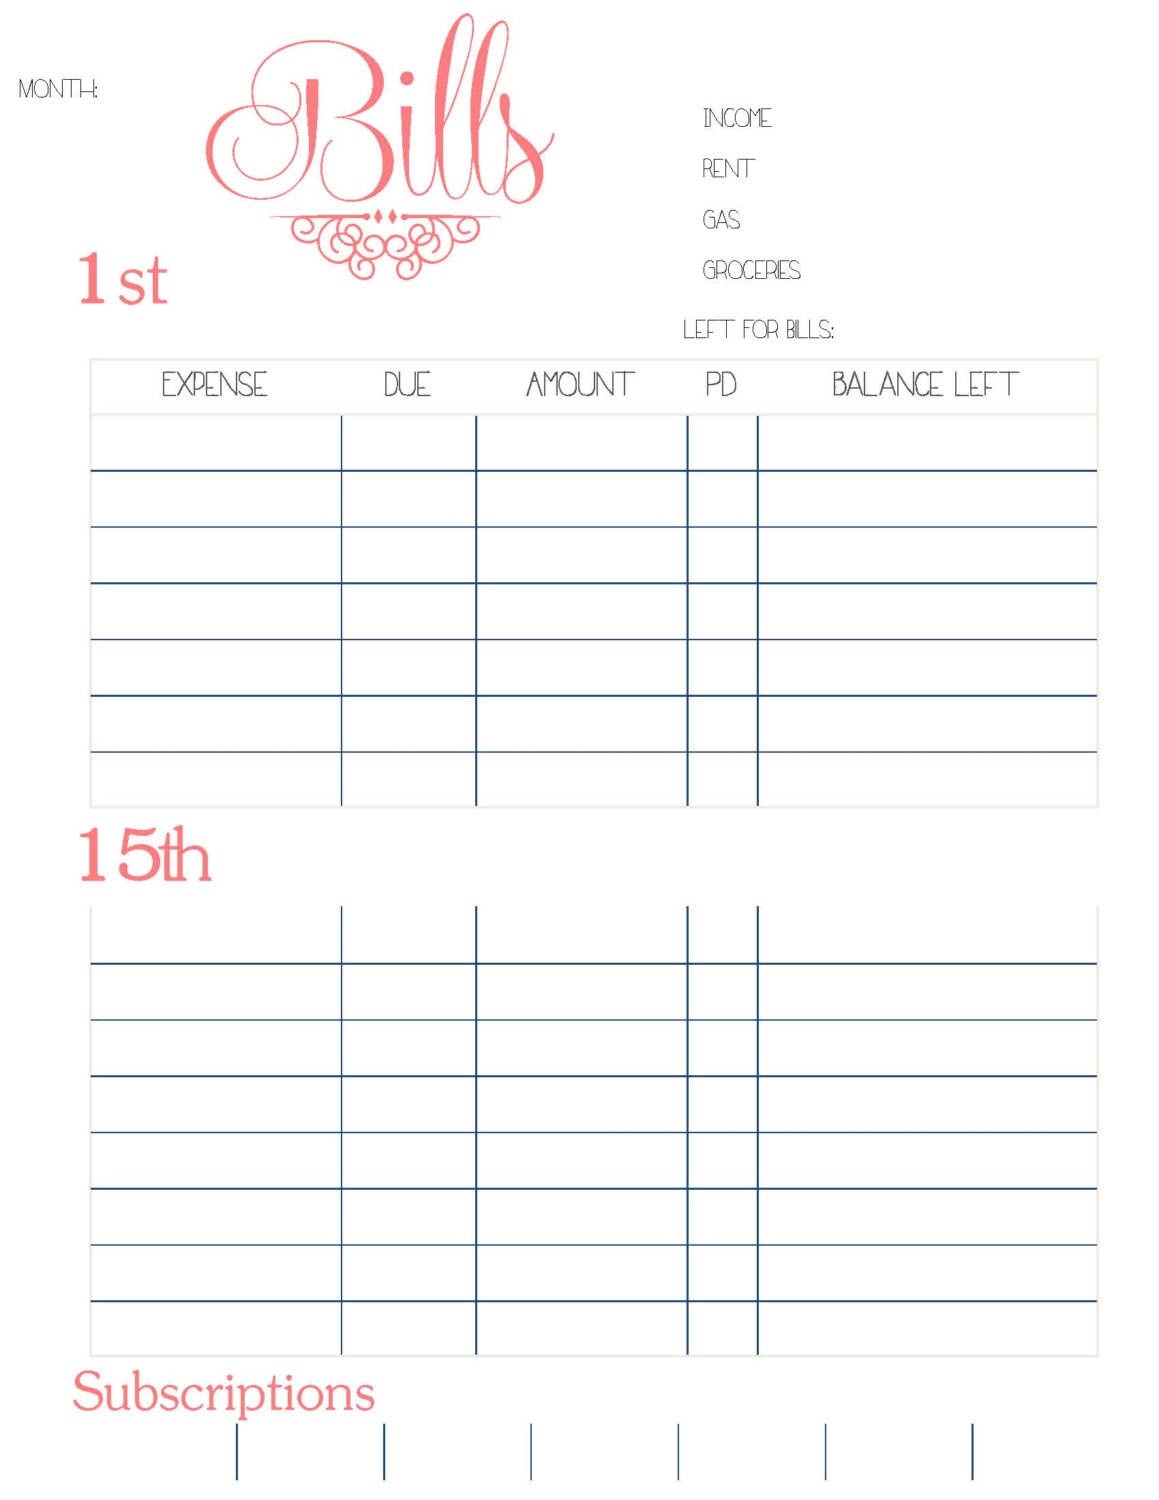 Monthly Bill Tracker Template Free - Yeniscale.co  Free Printable Monthly Bill Tracker